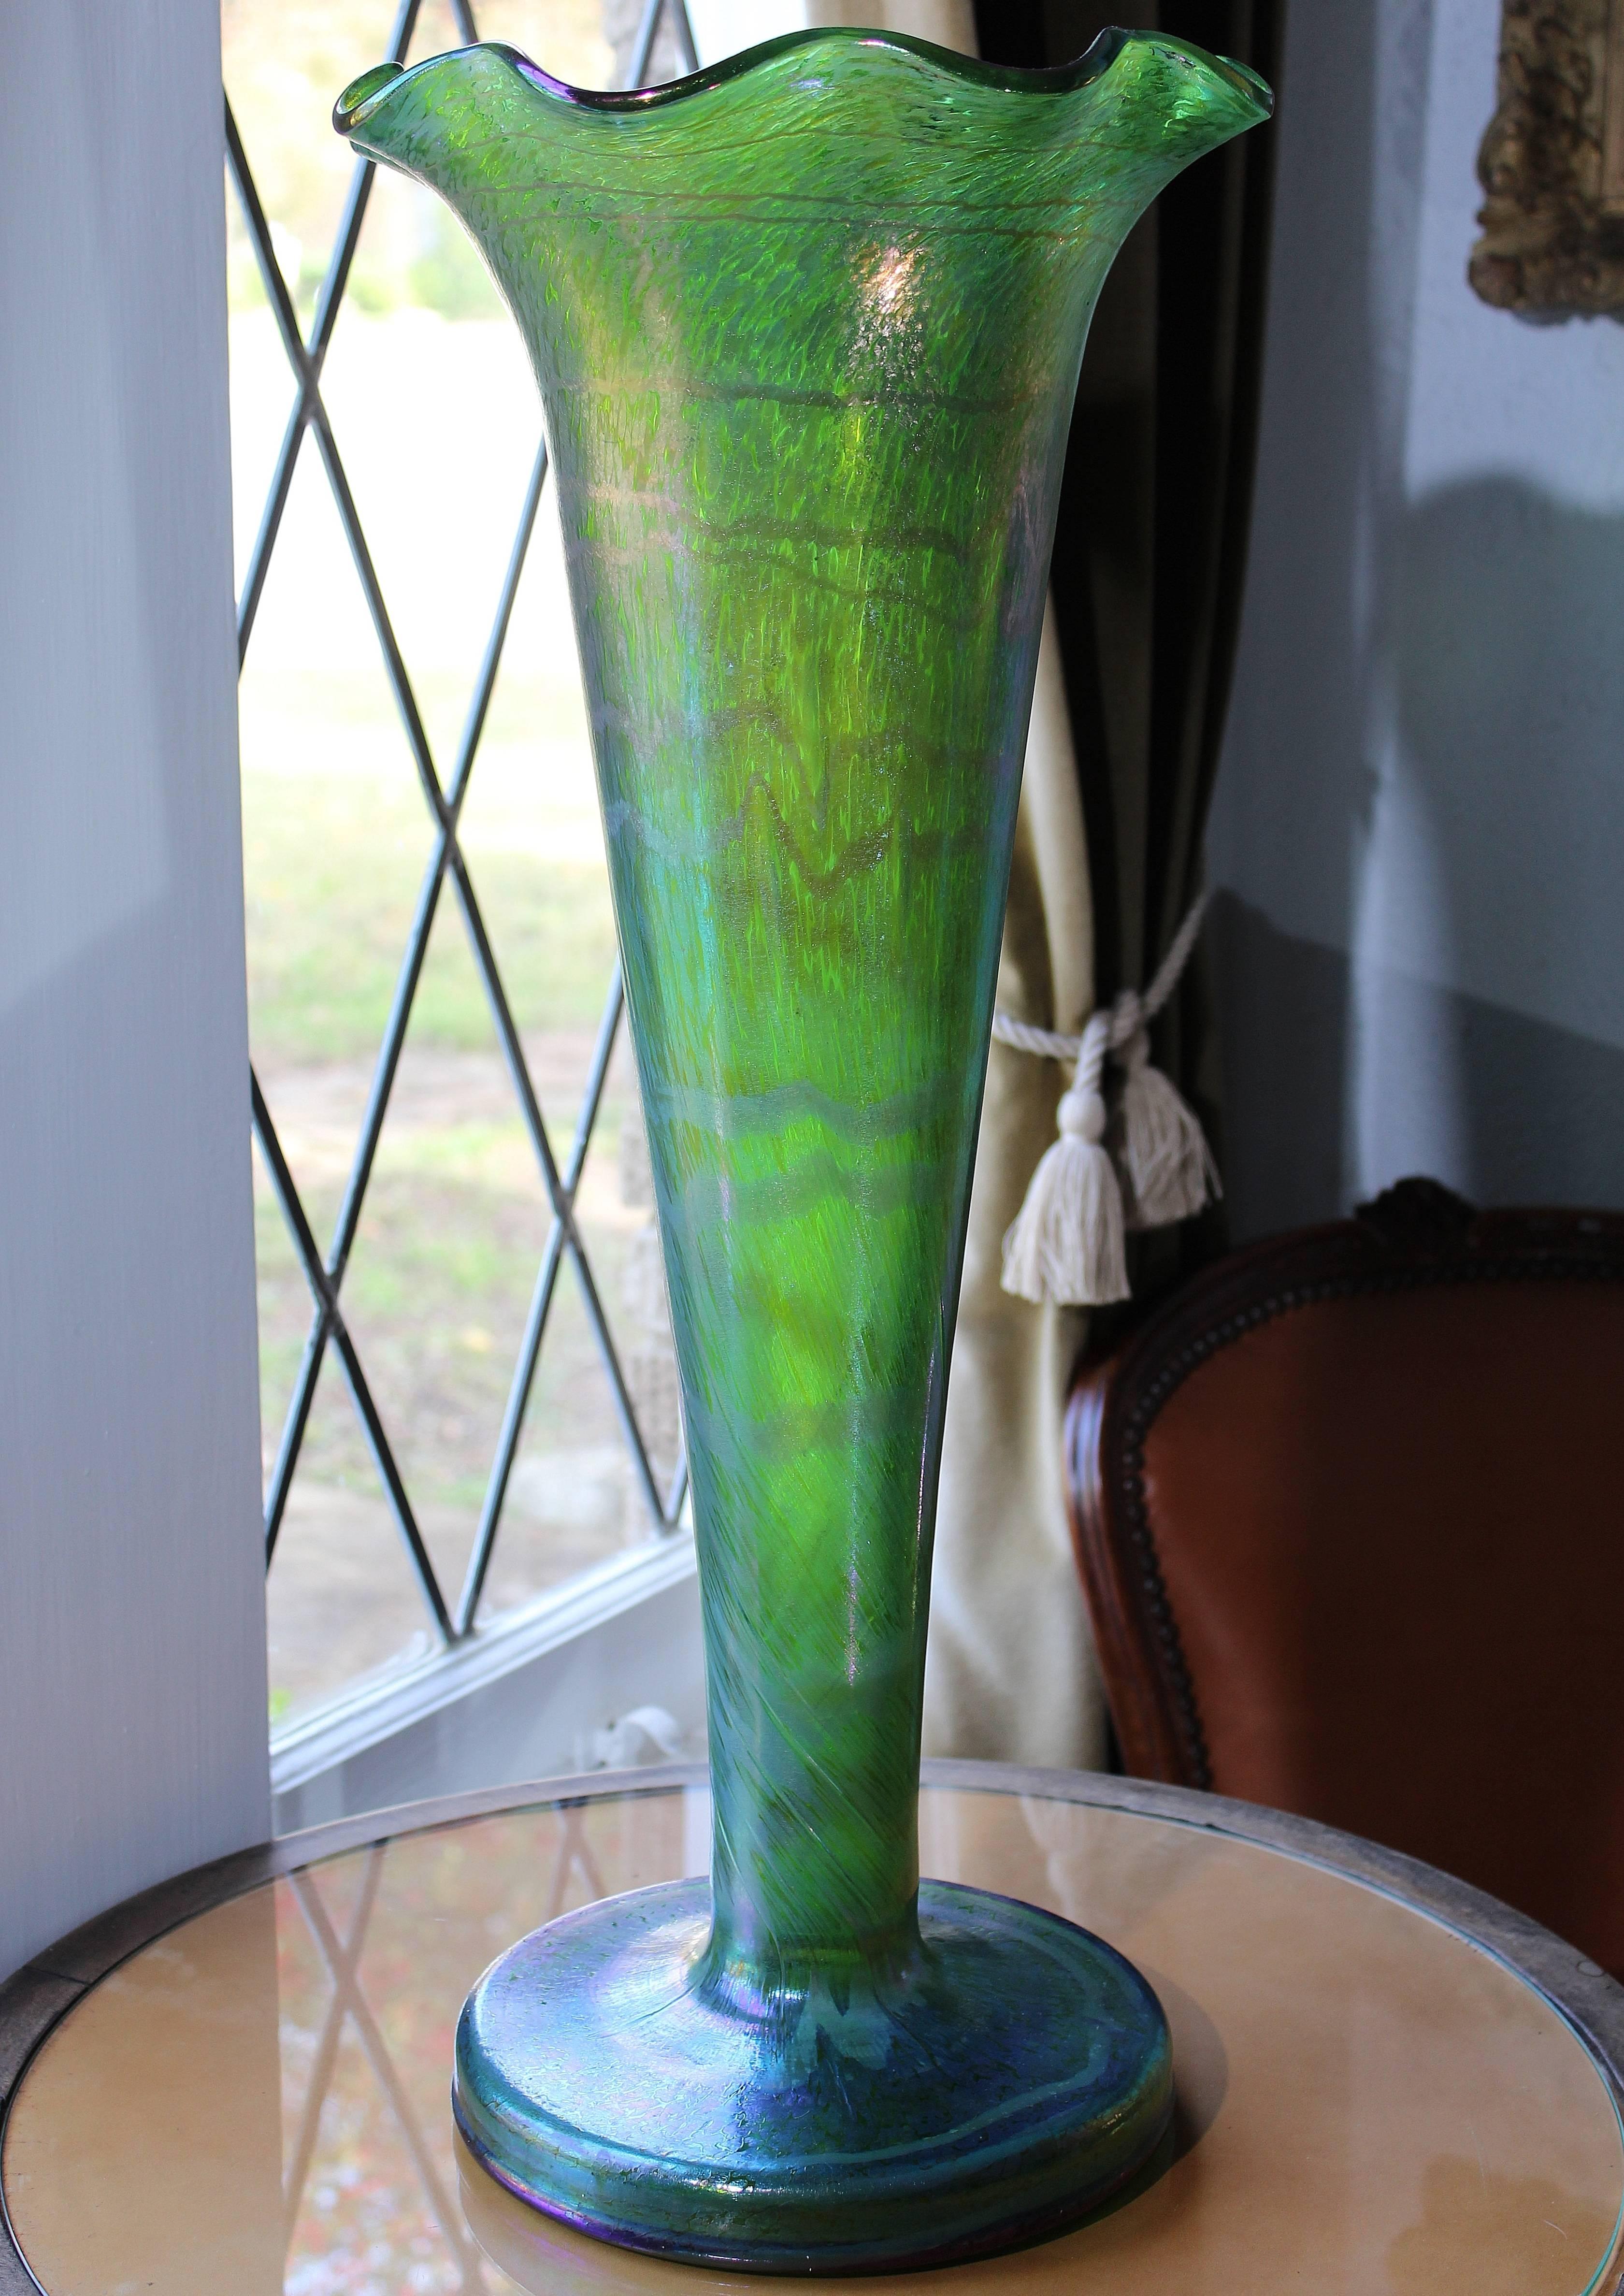 Art Nouveau green and silver irredescent art glass trumpet vase from Austria, circa 1900. Mottled striated and swirled oil spot design with irredescent blue and purple favrille design. Absolutely spectacular and large!

Measures: Height: 24